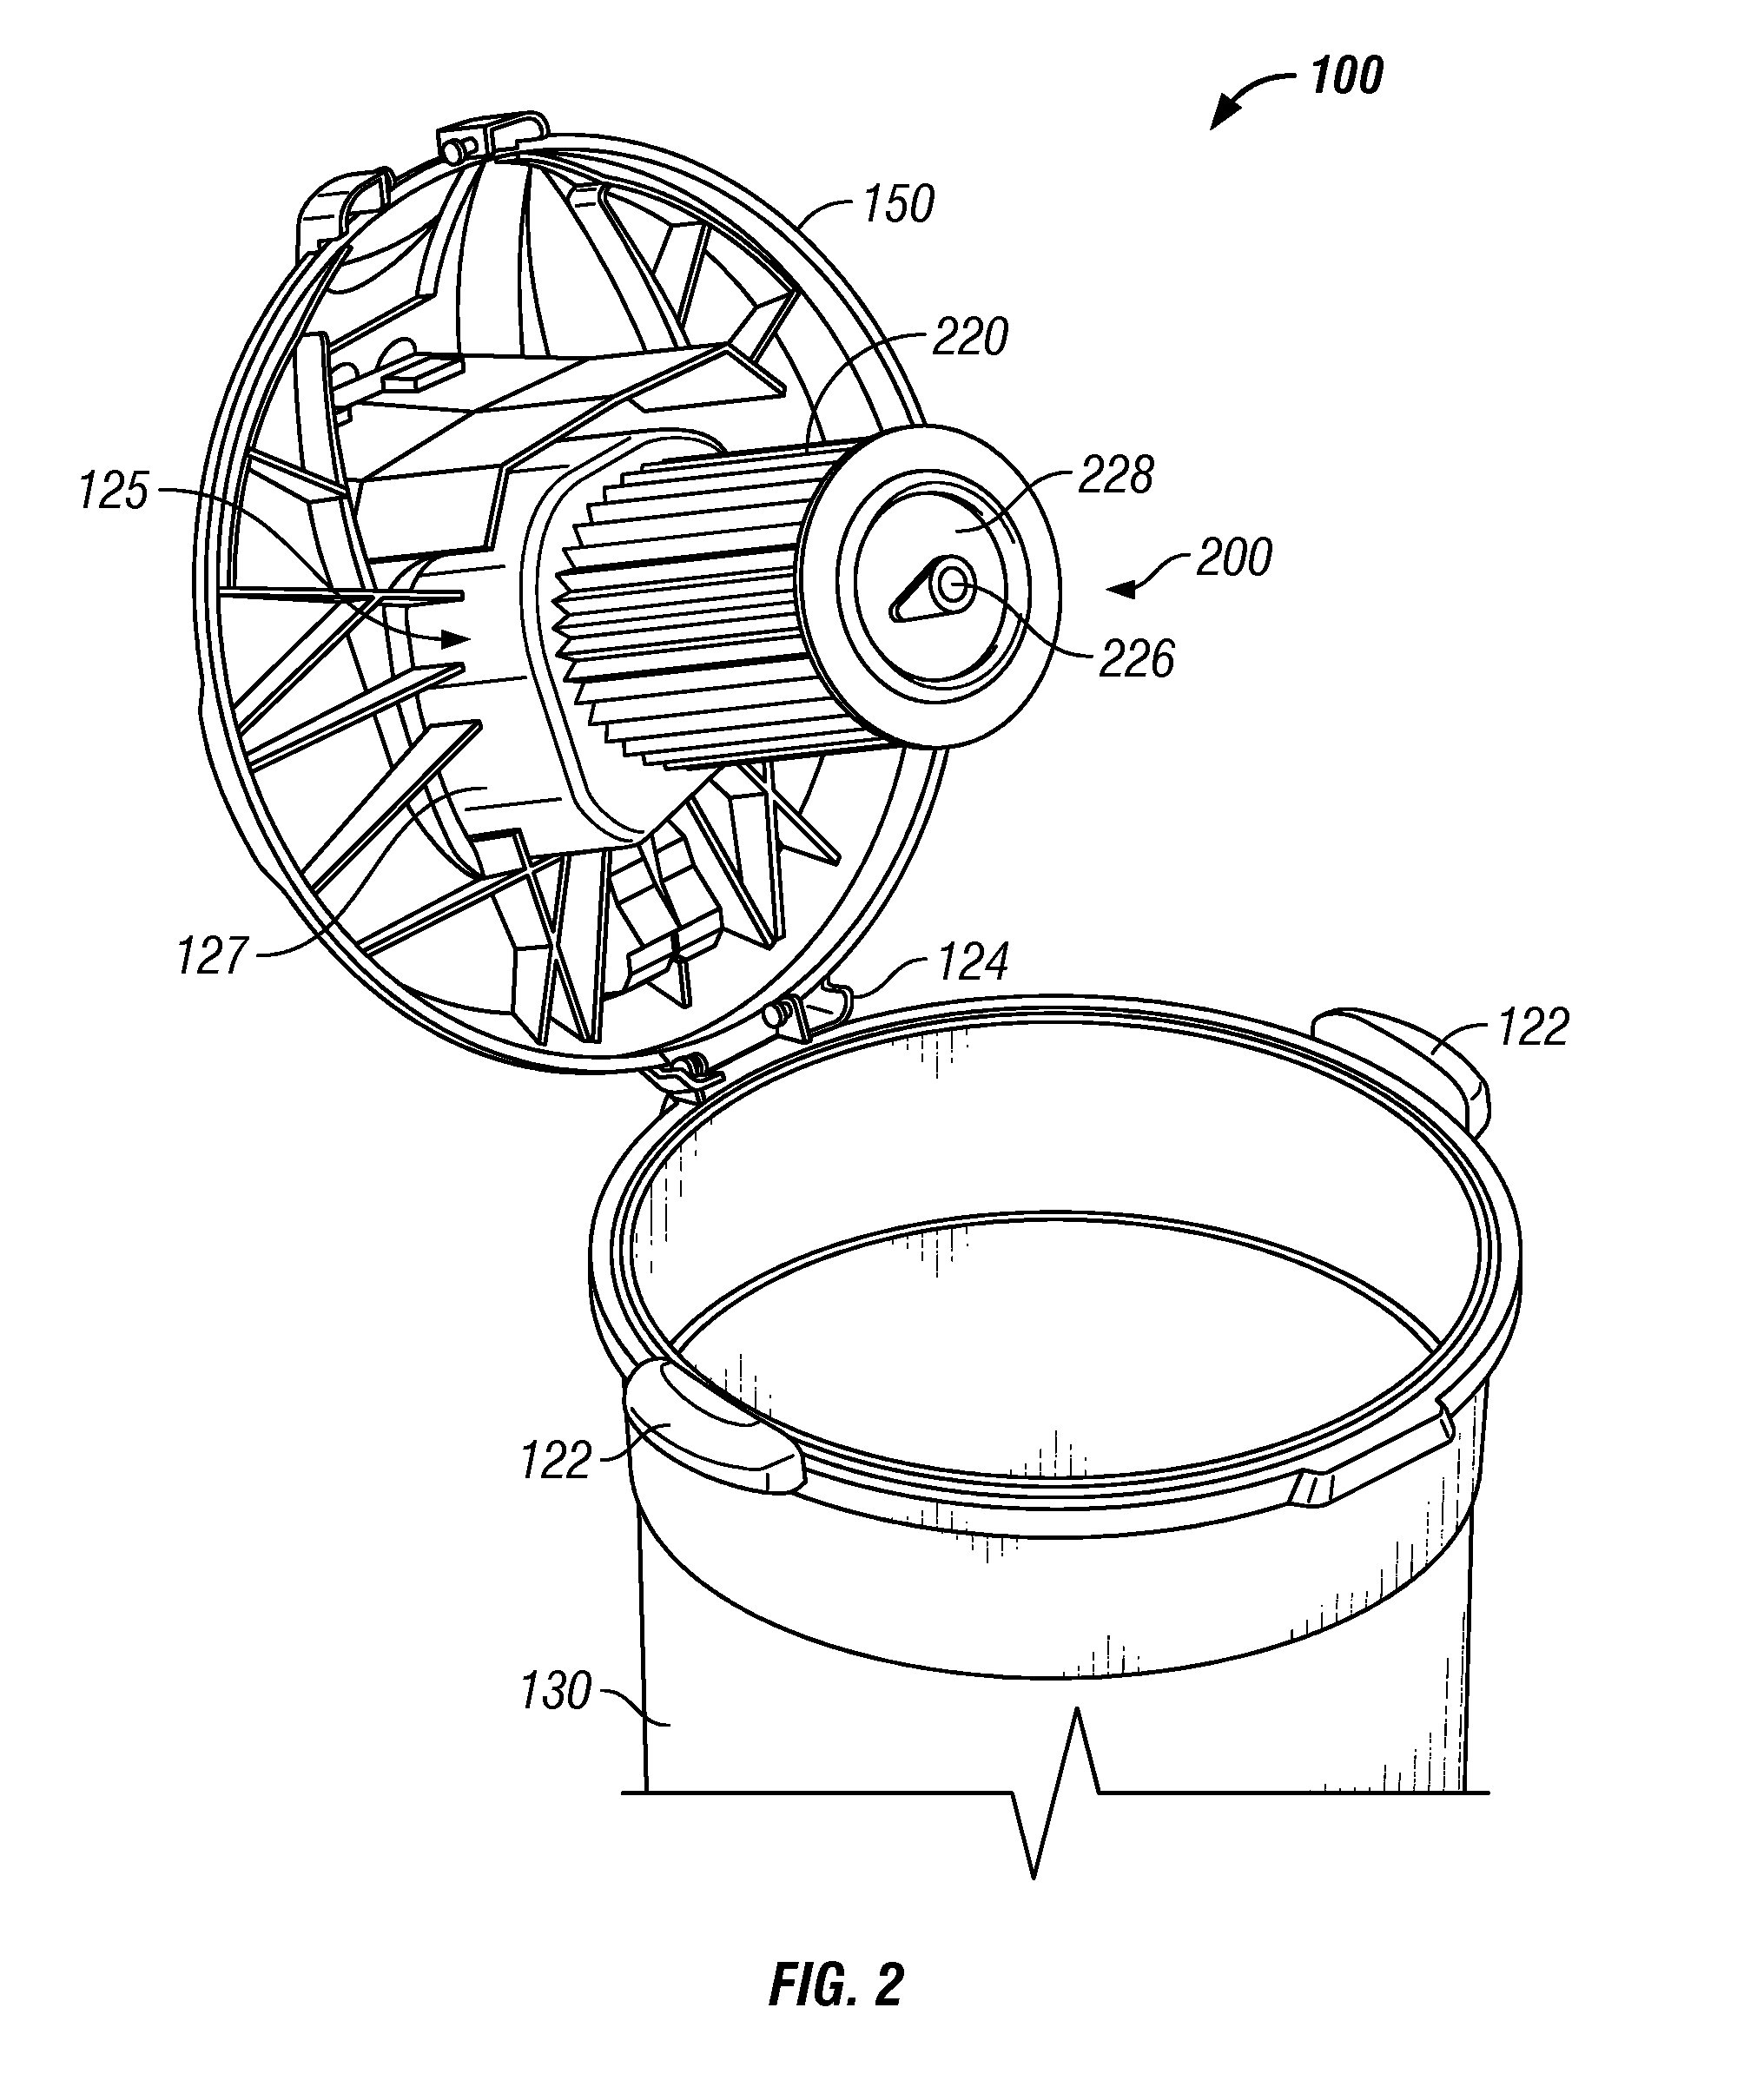 Easy access filter assembly for a wet/dry vacuum appliance